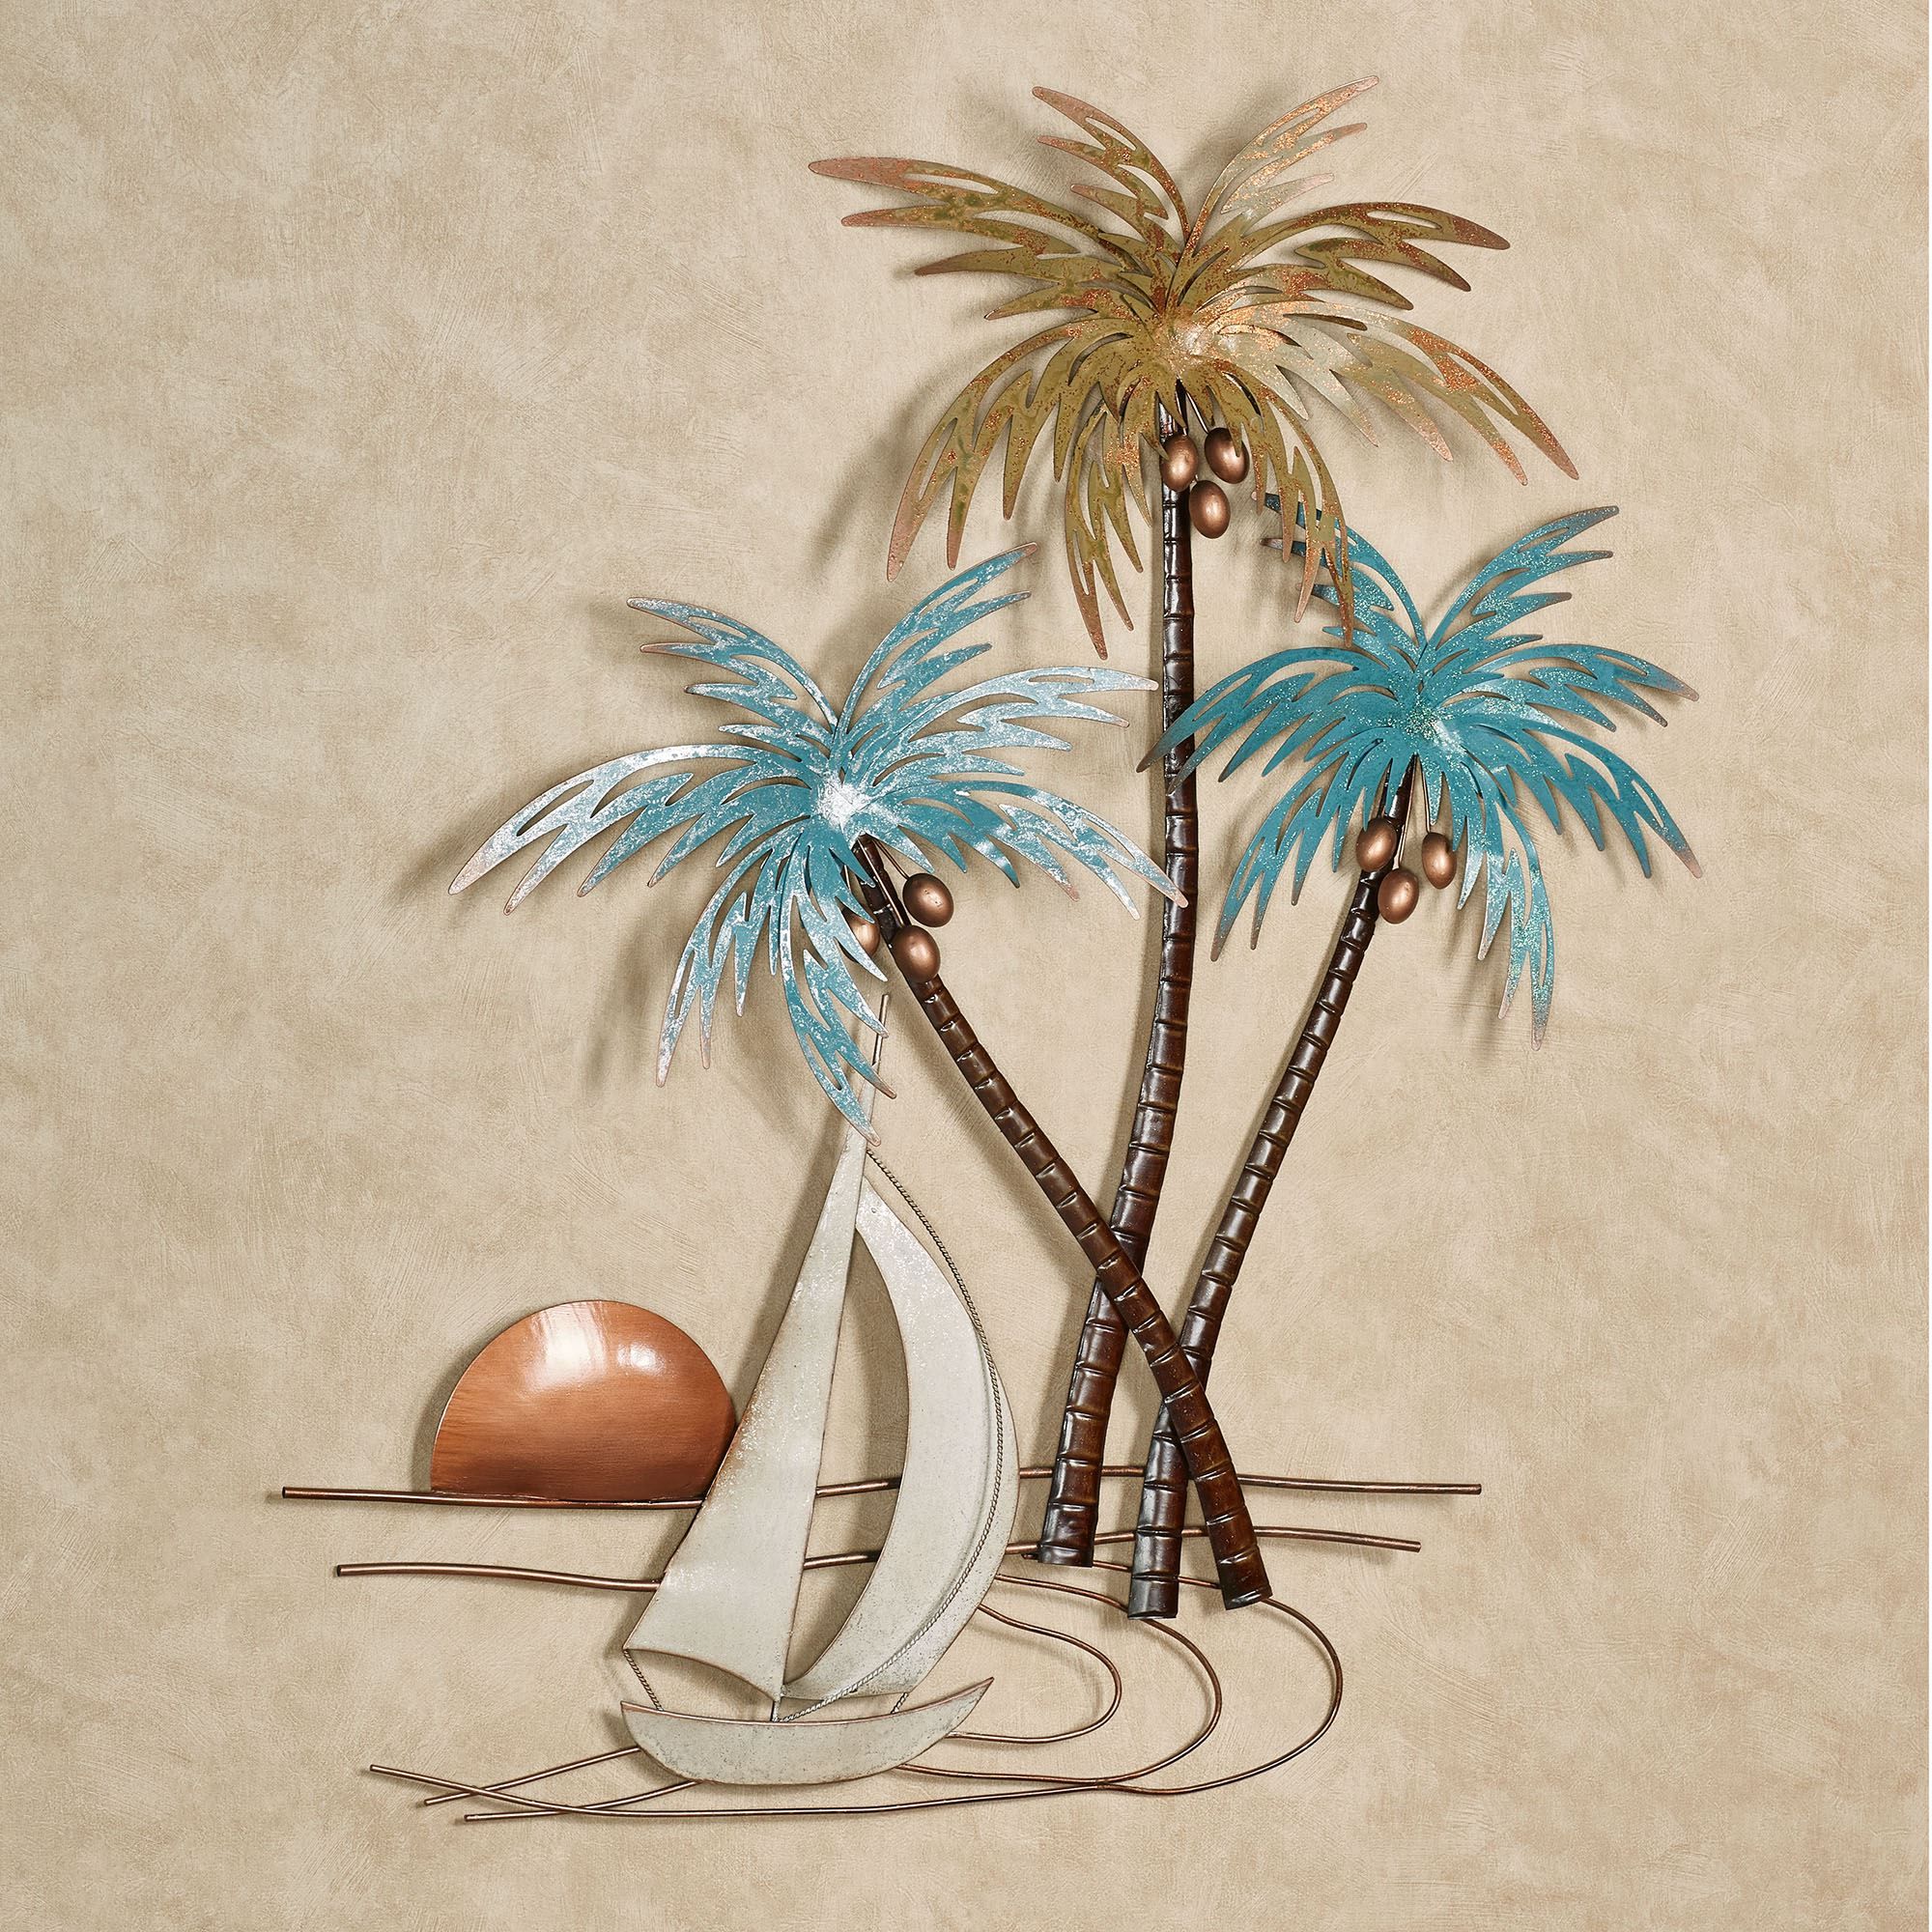 Palm Leaves Wall Art Intended For Most Current Sunset Paradise Tropical Palm Tree Metal Wall Art (View 17 of 20)